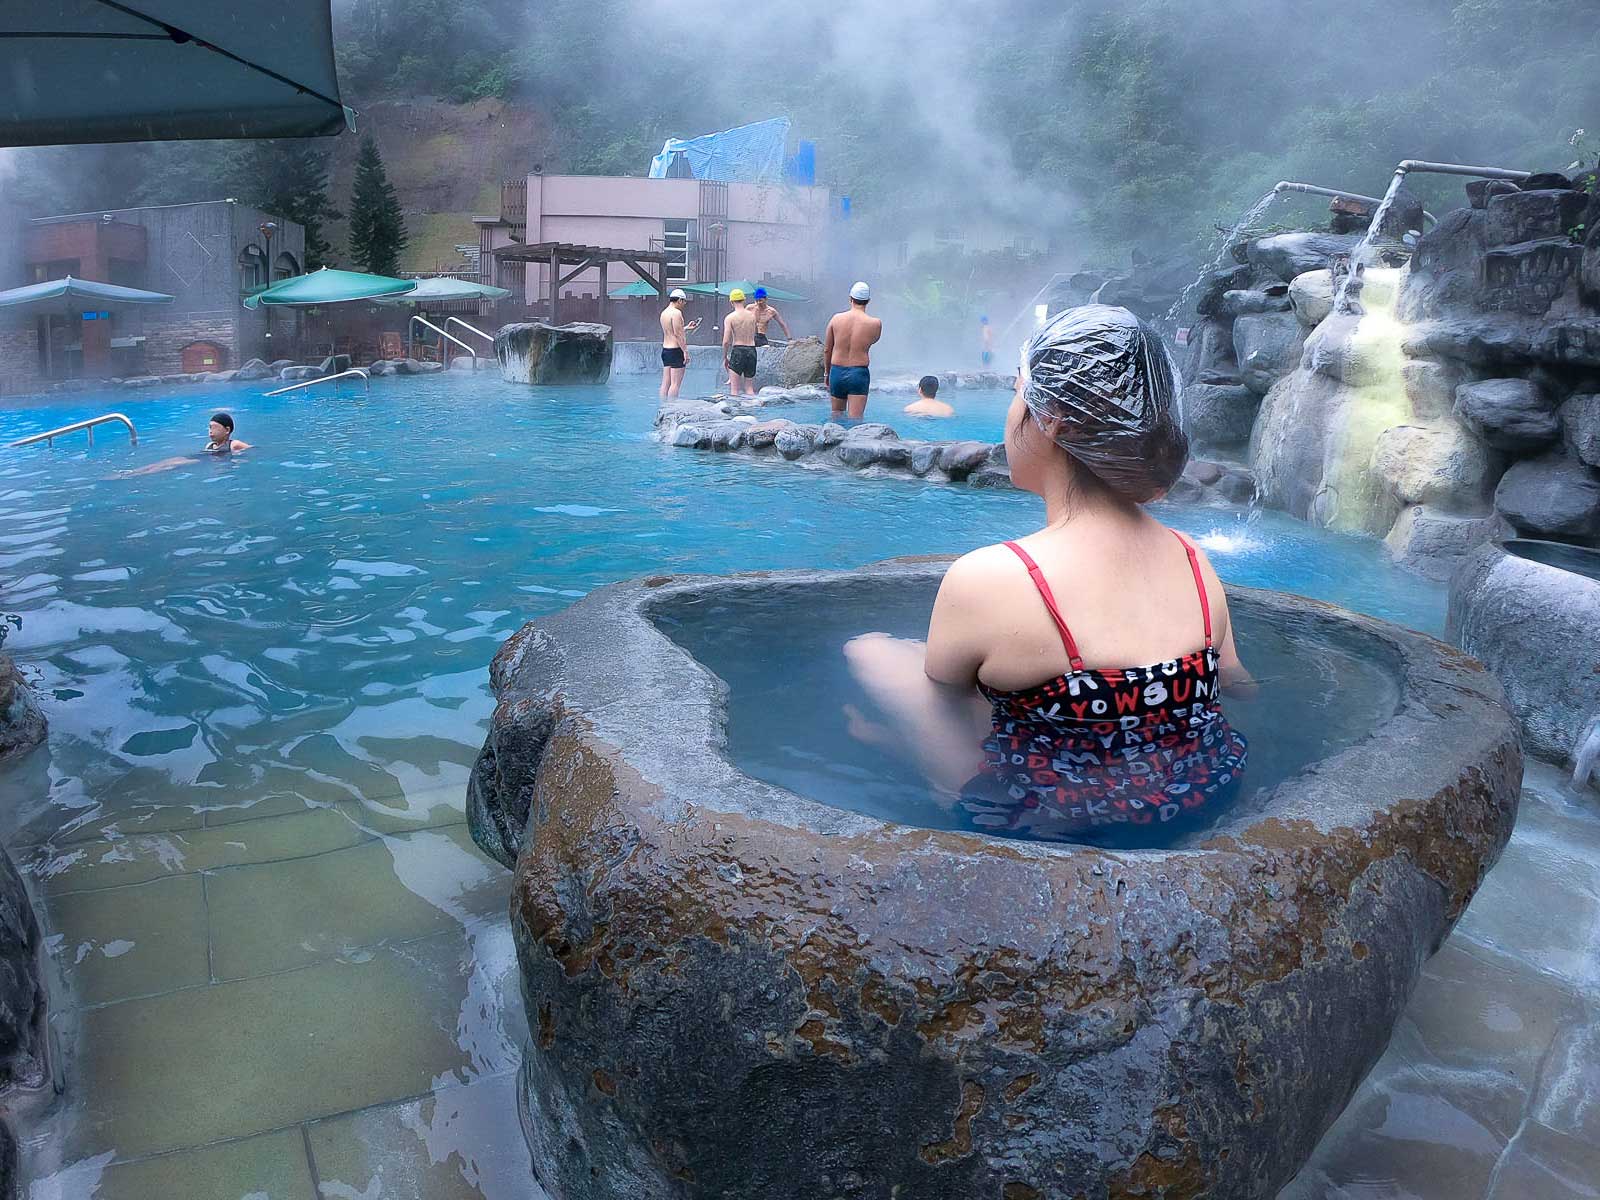 A bather enjoying a private hot spring pool within the larger public open-air hot spring at Jioujhihze Hot Spring.